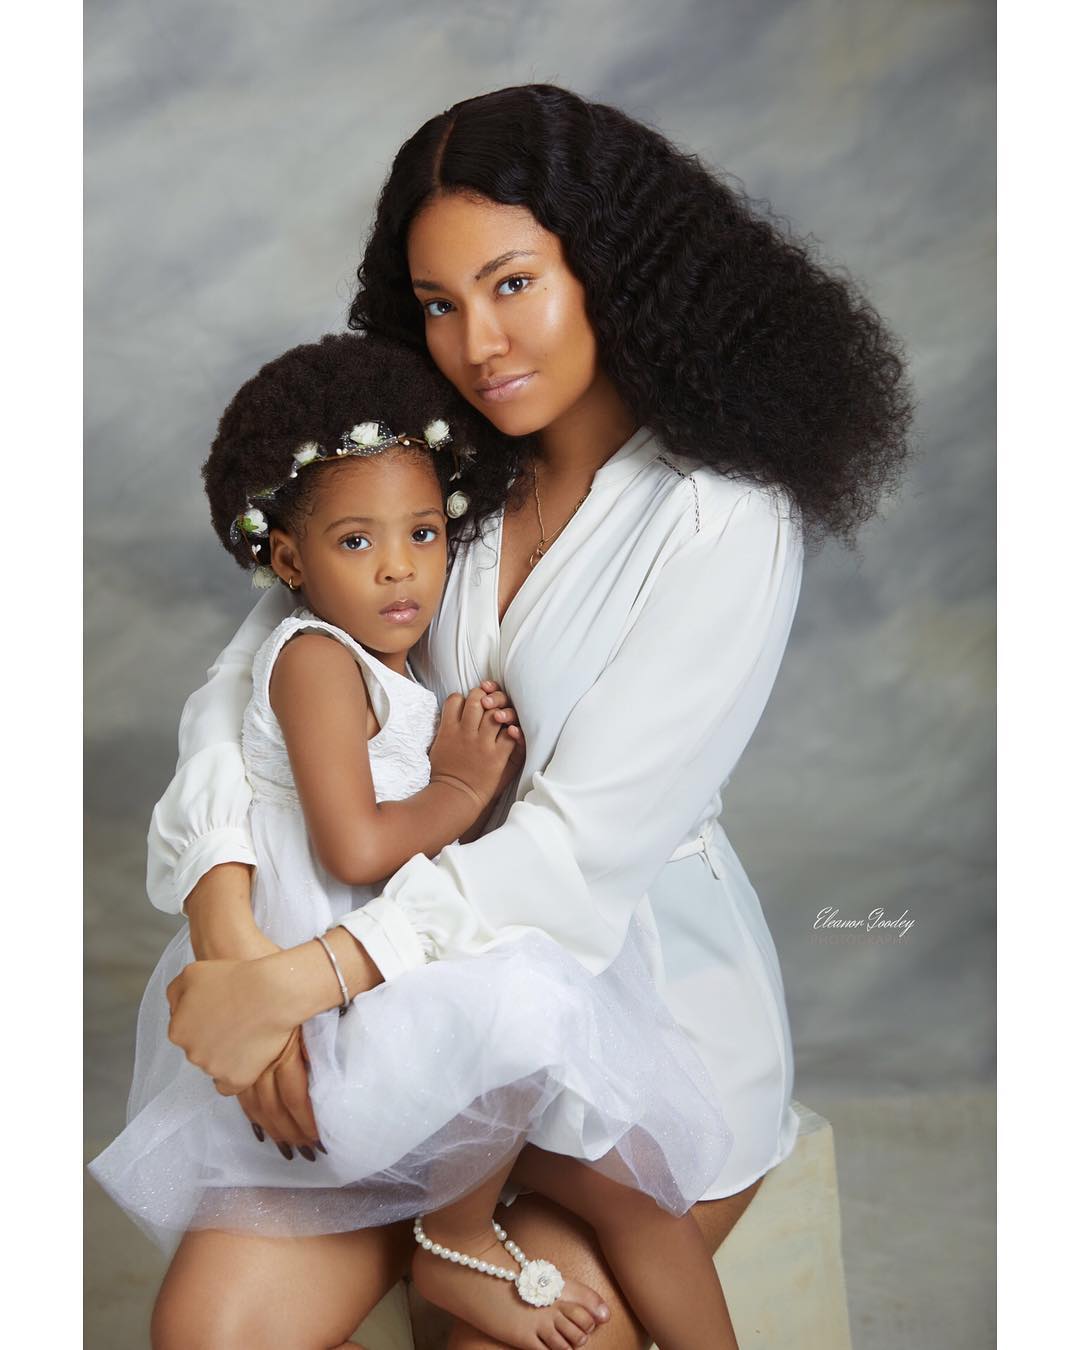 More beautiful photos of Anna Banner and daughter Sofia